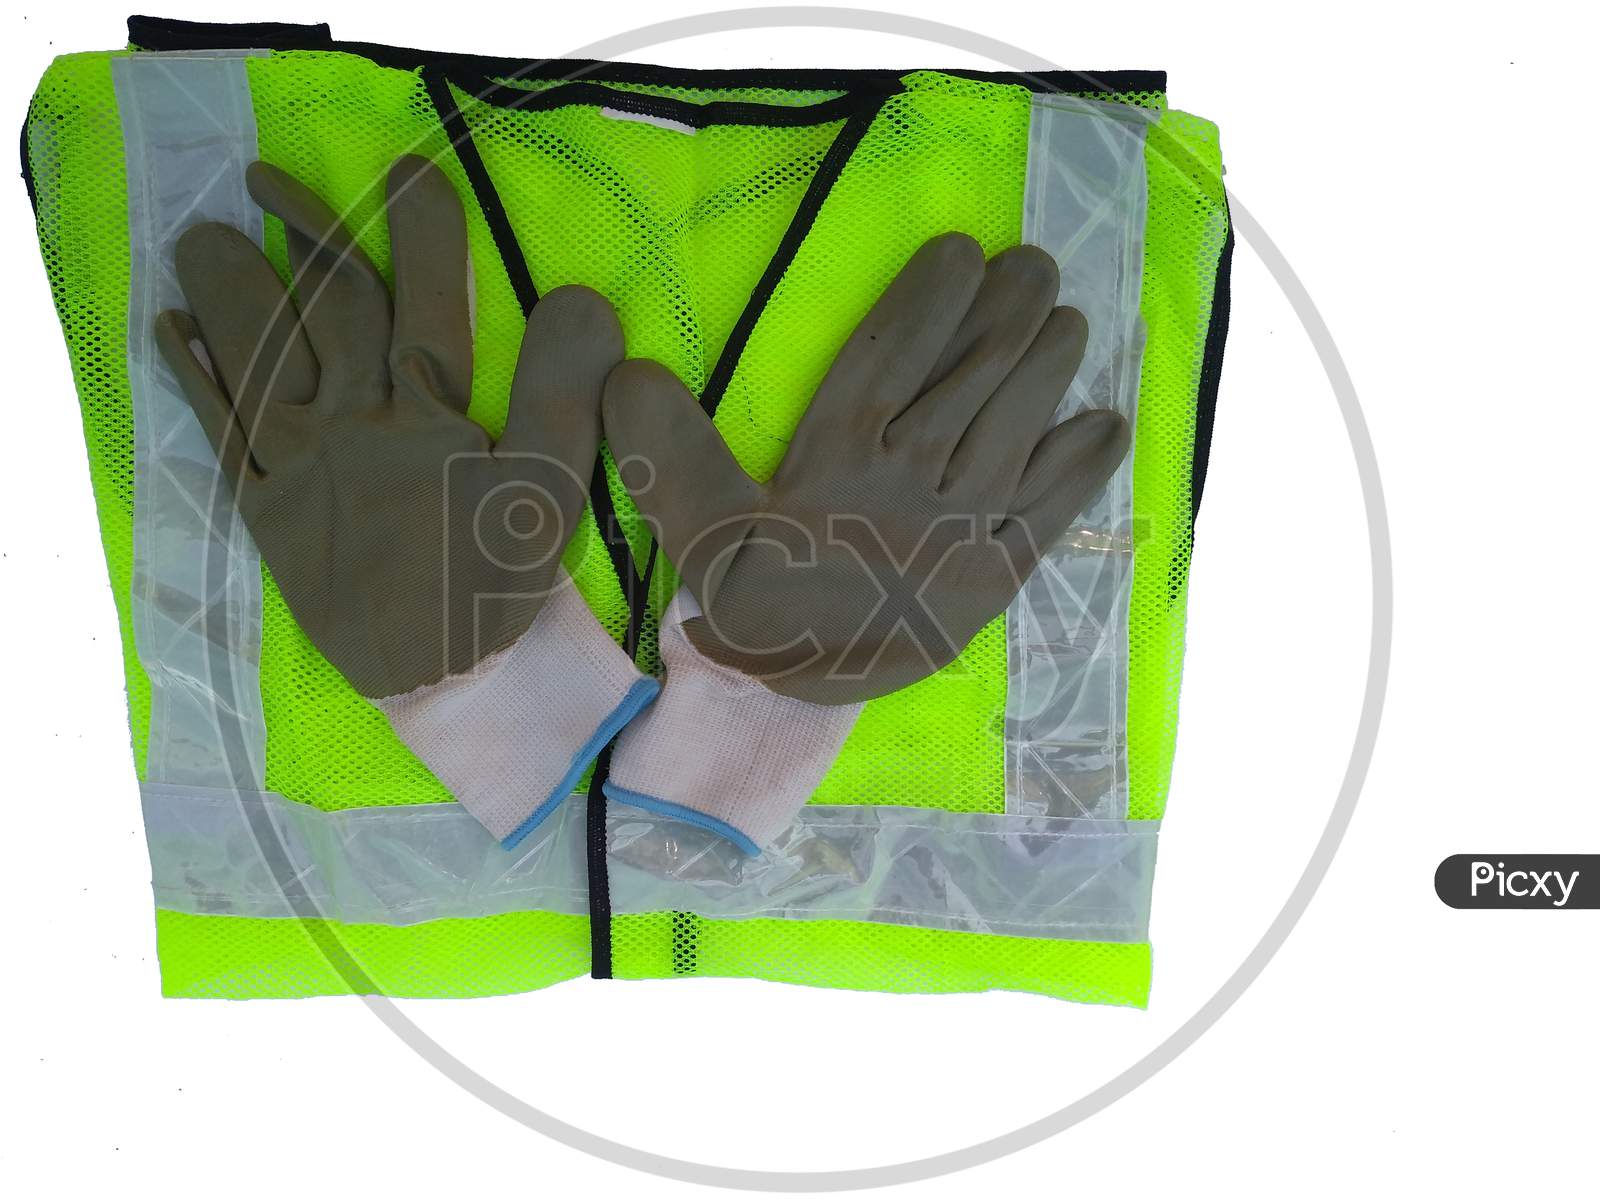 Standard Construction Safety Equipment On White Backgrounds. Top View